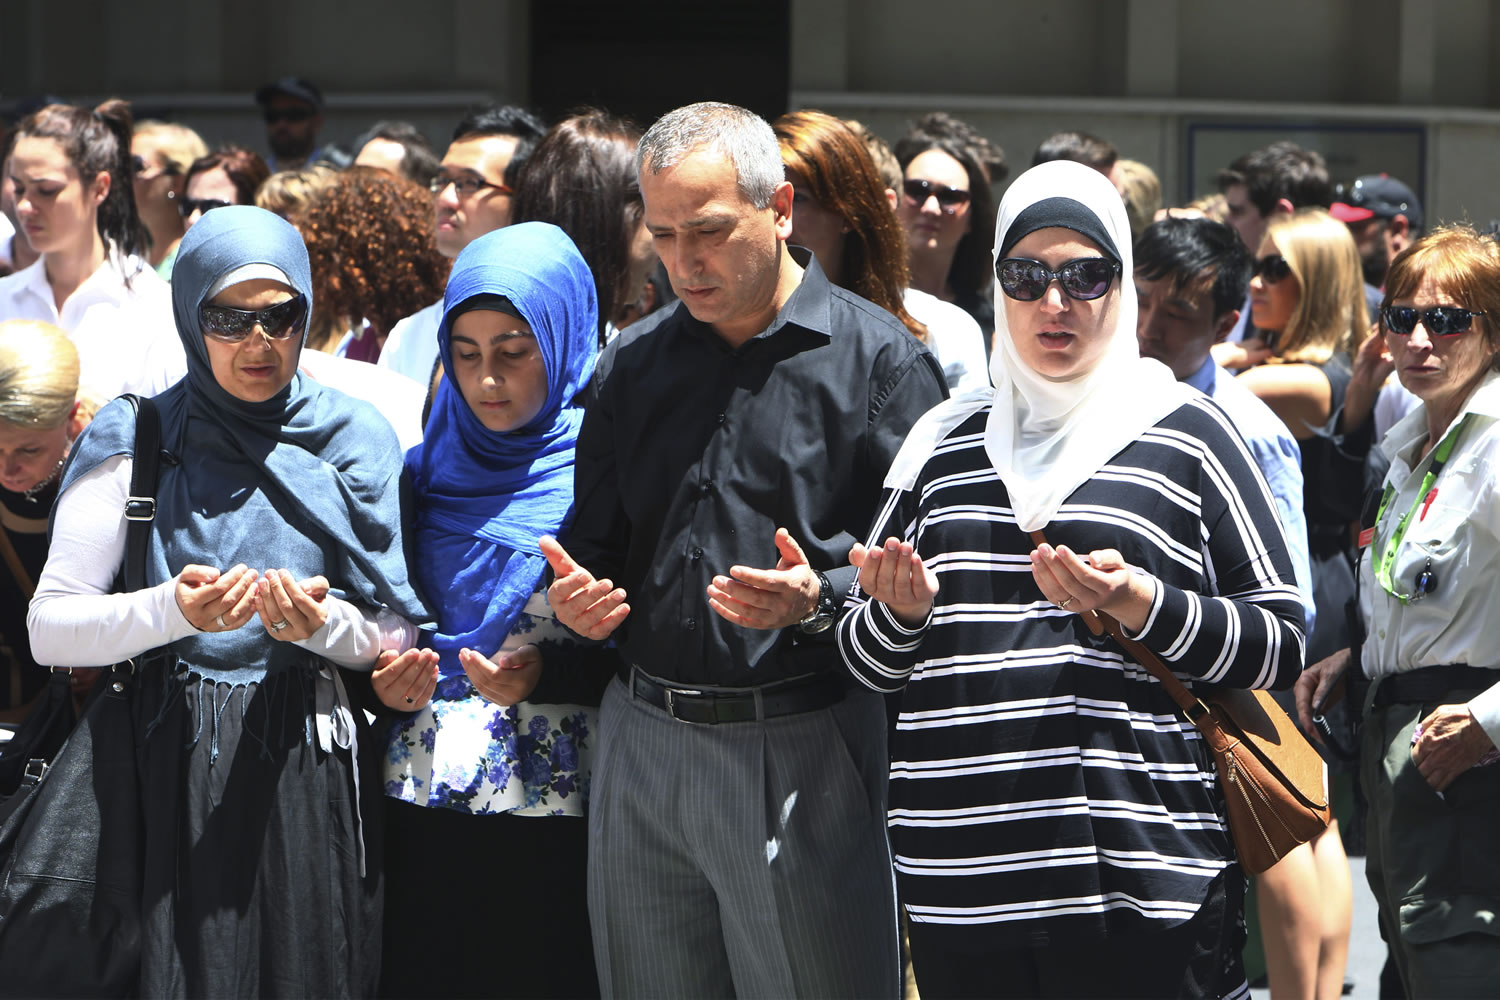 Sydney Muslim community leader Jamal Rifi, center, and his family members pray at a makeshift memorial after a siege at Martin Place in the central business district of Sydney, Australia, on Tuesday.